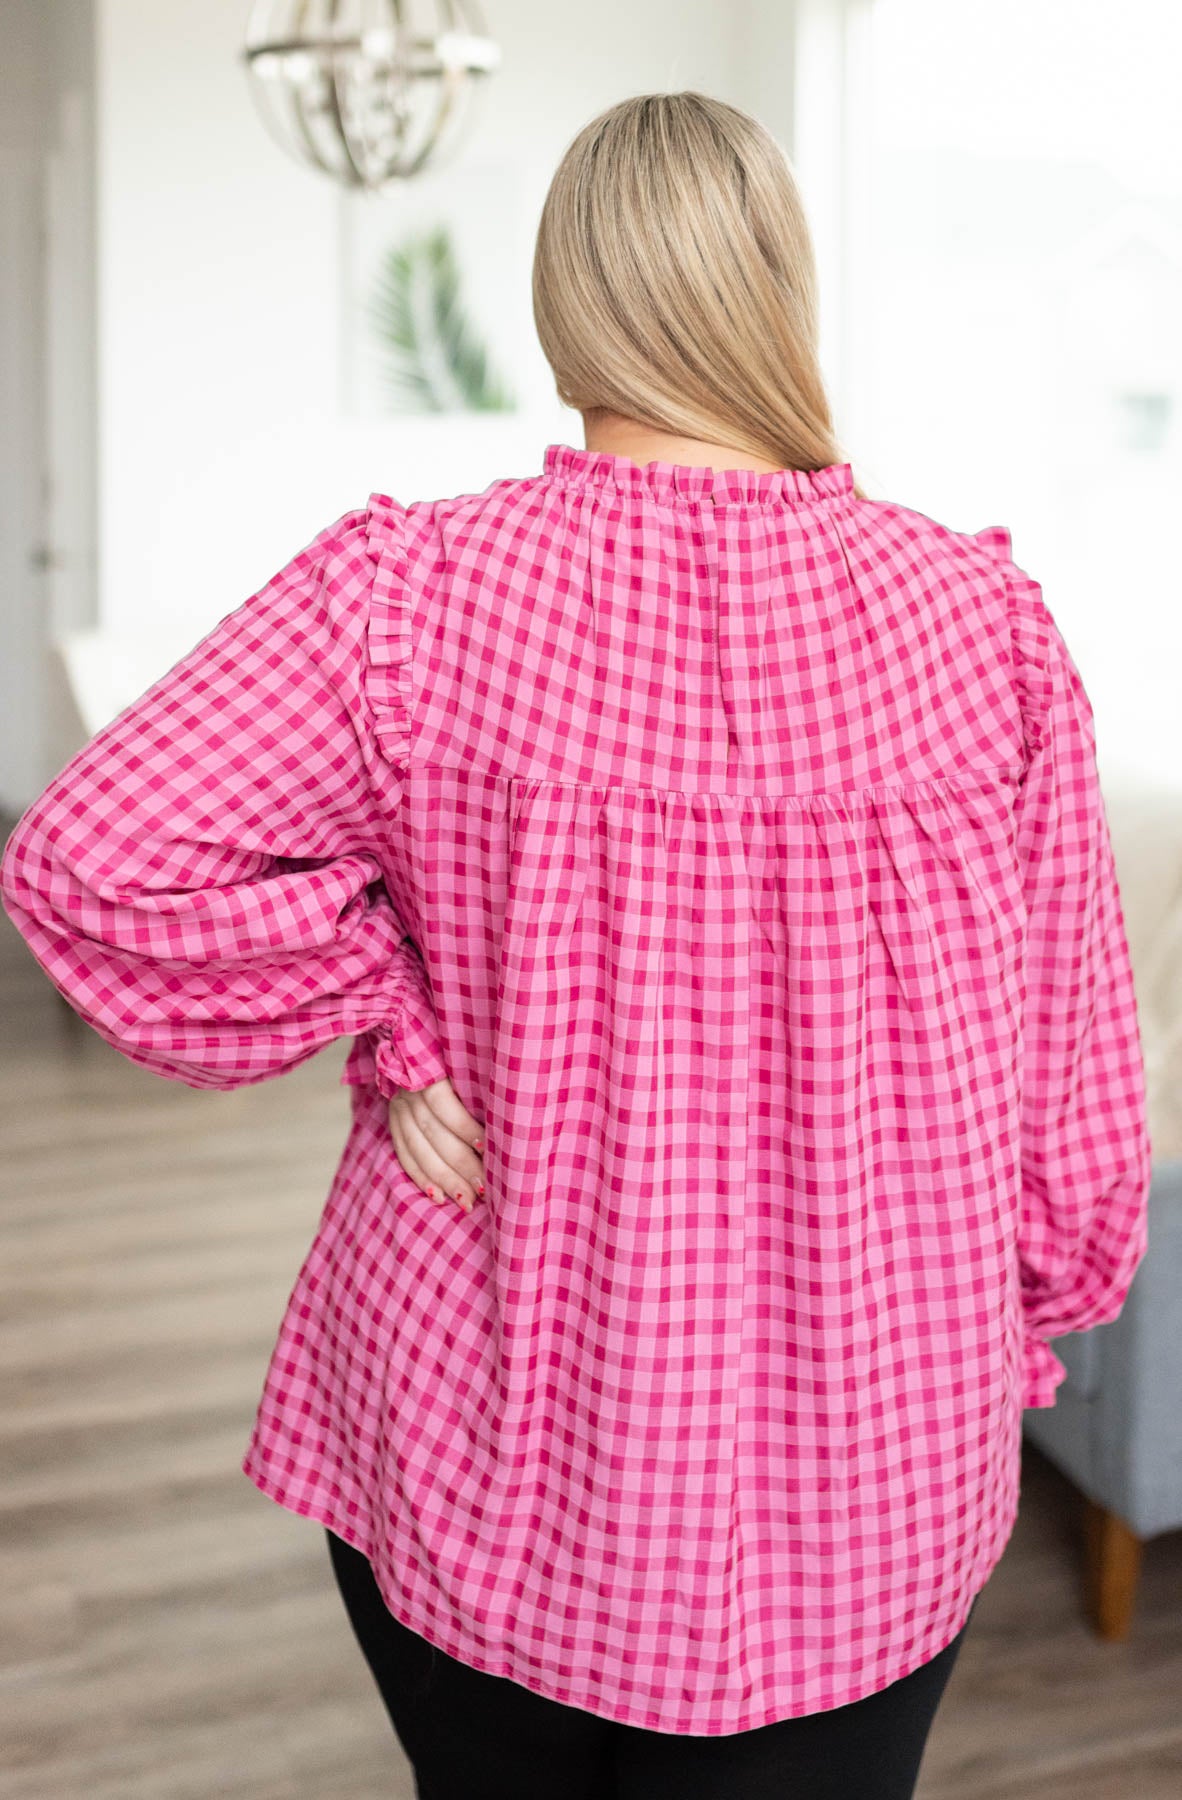 Back view of the plus size pink fuchsia ruffle blouse